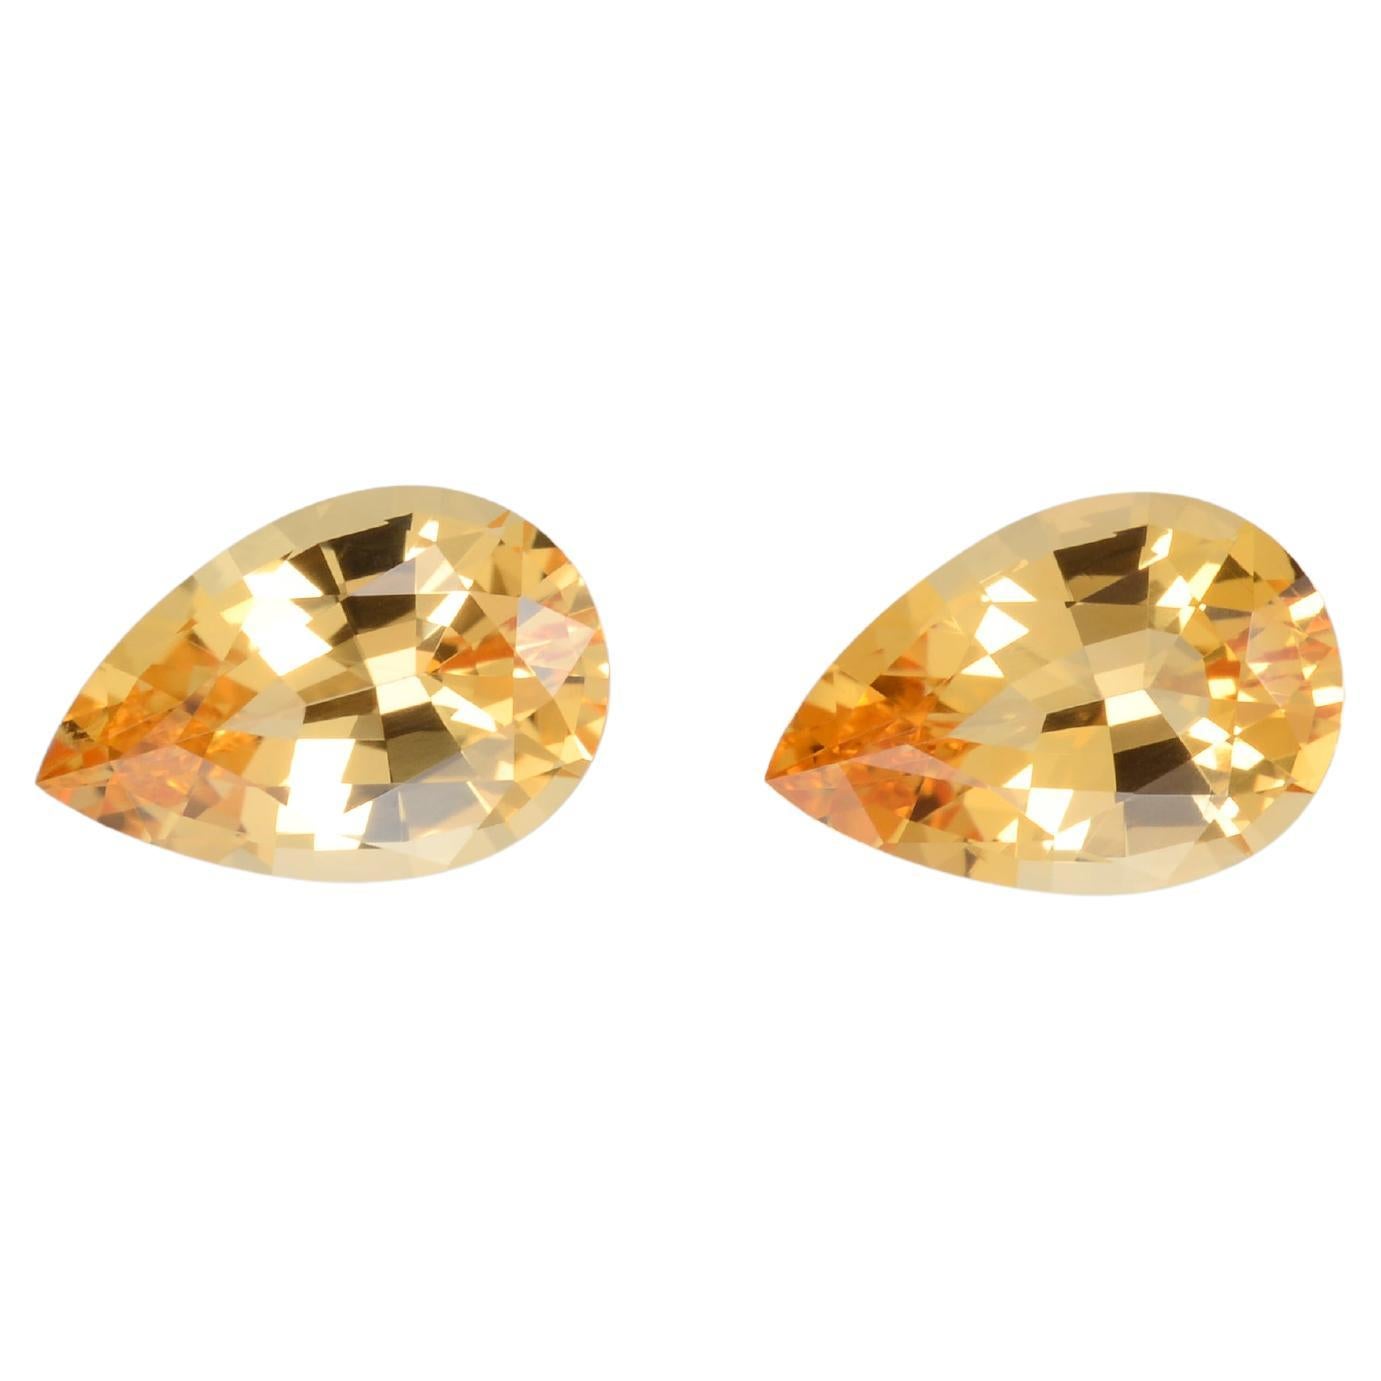 Contemporary Imperial Topaz Earrings Loose Gemstones Unmounted 2.53 Carat Yellow Pair For Sale